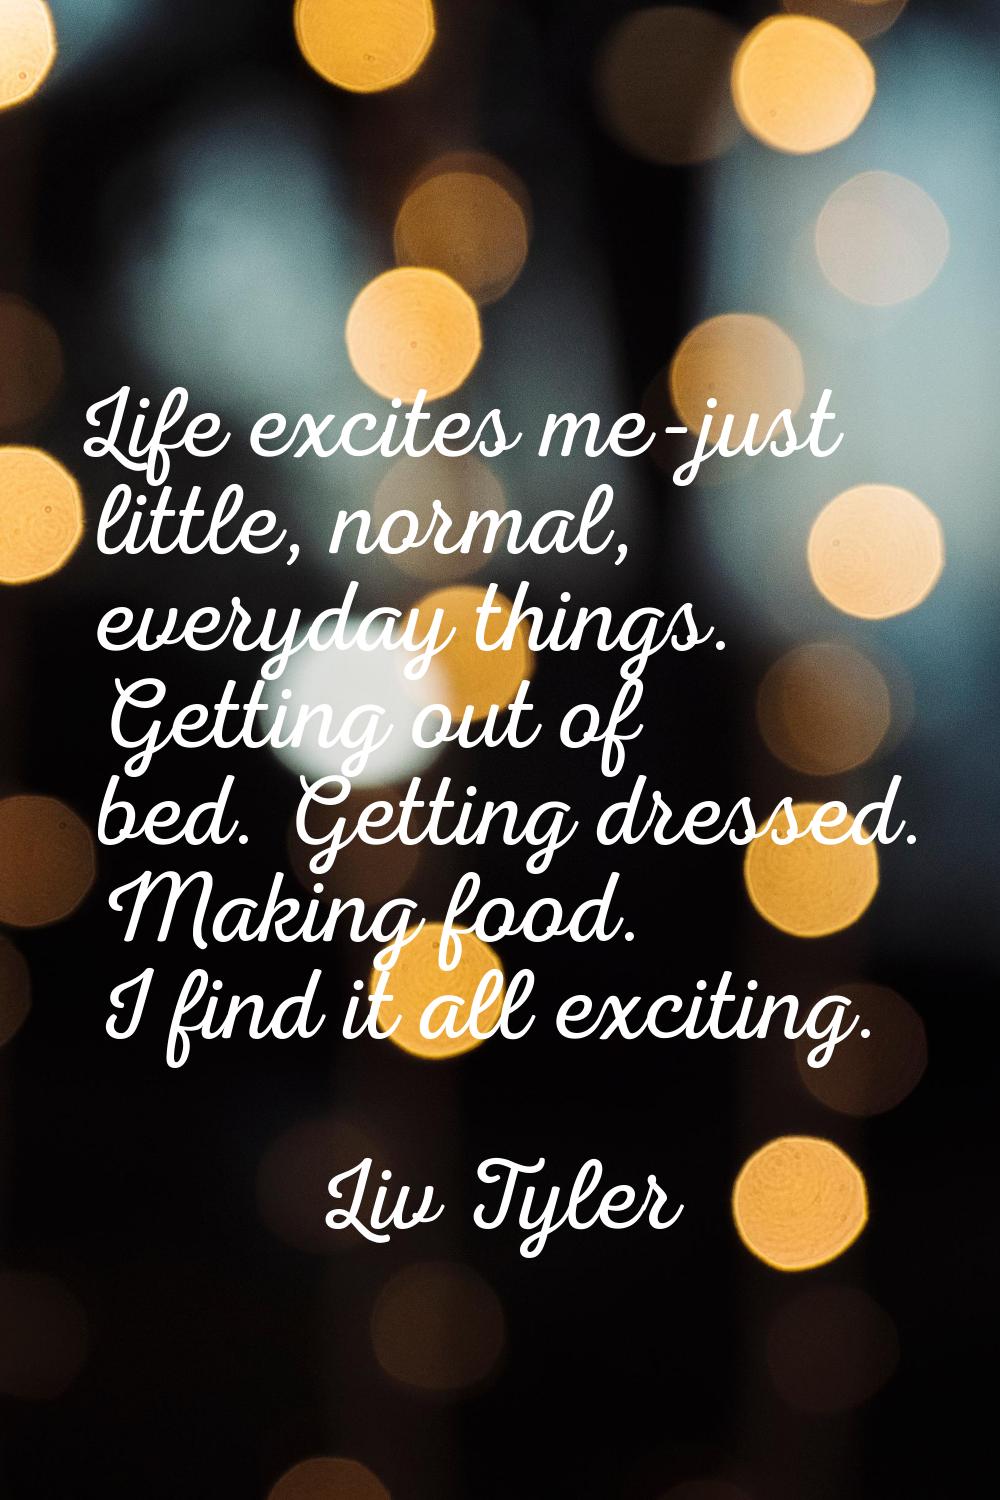 Life excites me-just little, normal, everyday things. Getting out of bed. Getting dressed. Making f